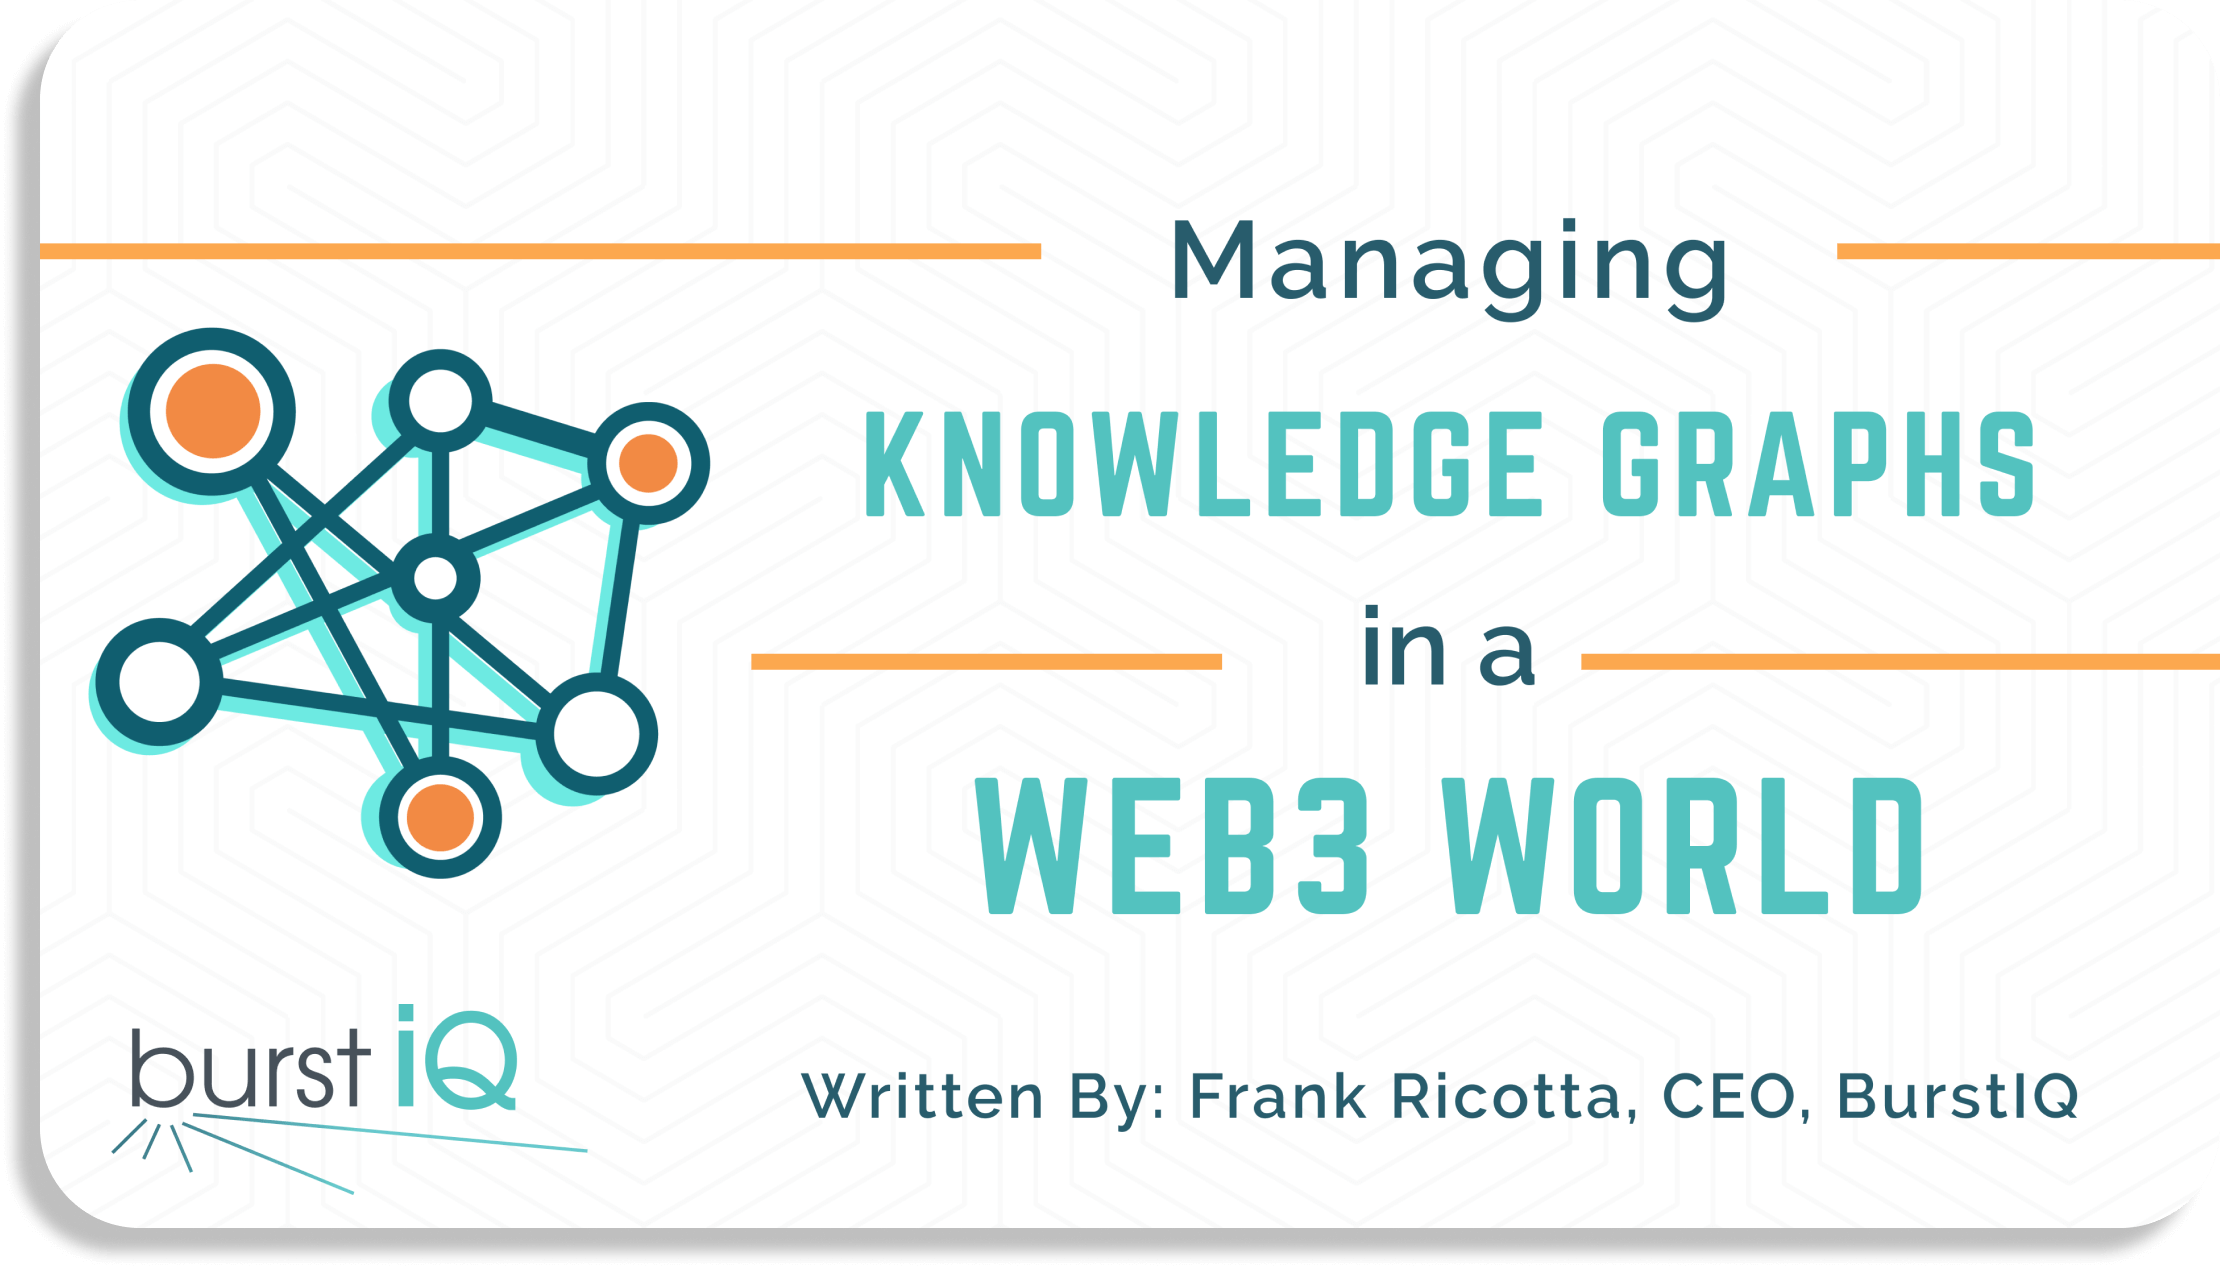 LifeGraph Blog thumbnail for Managing Knowledge Graphs in a Web3 World